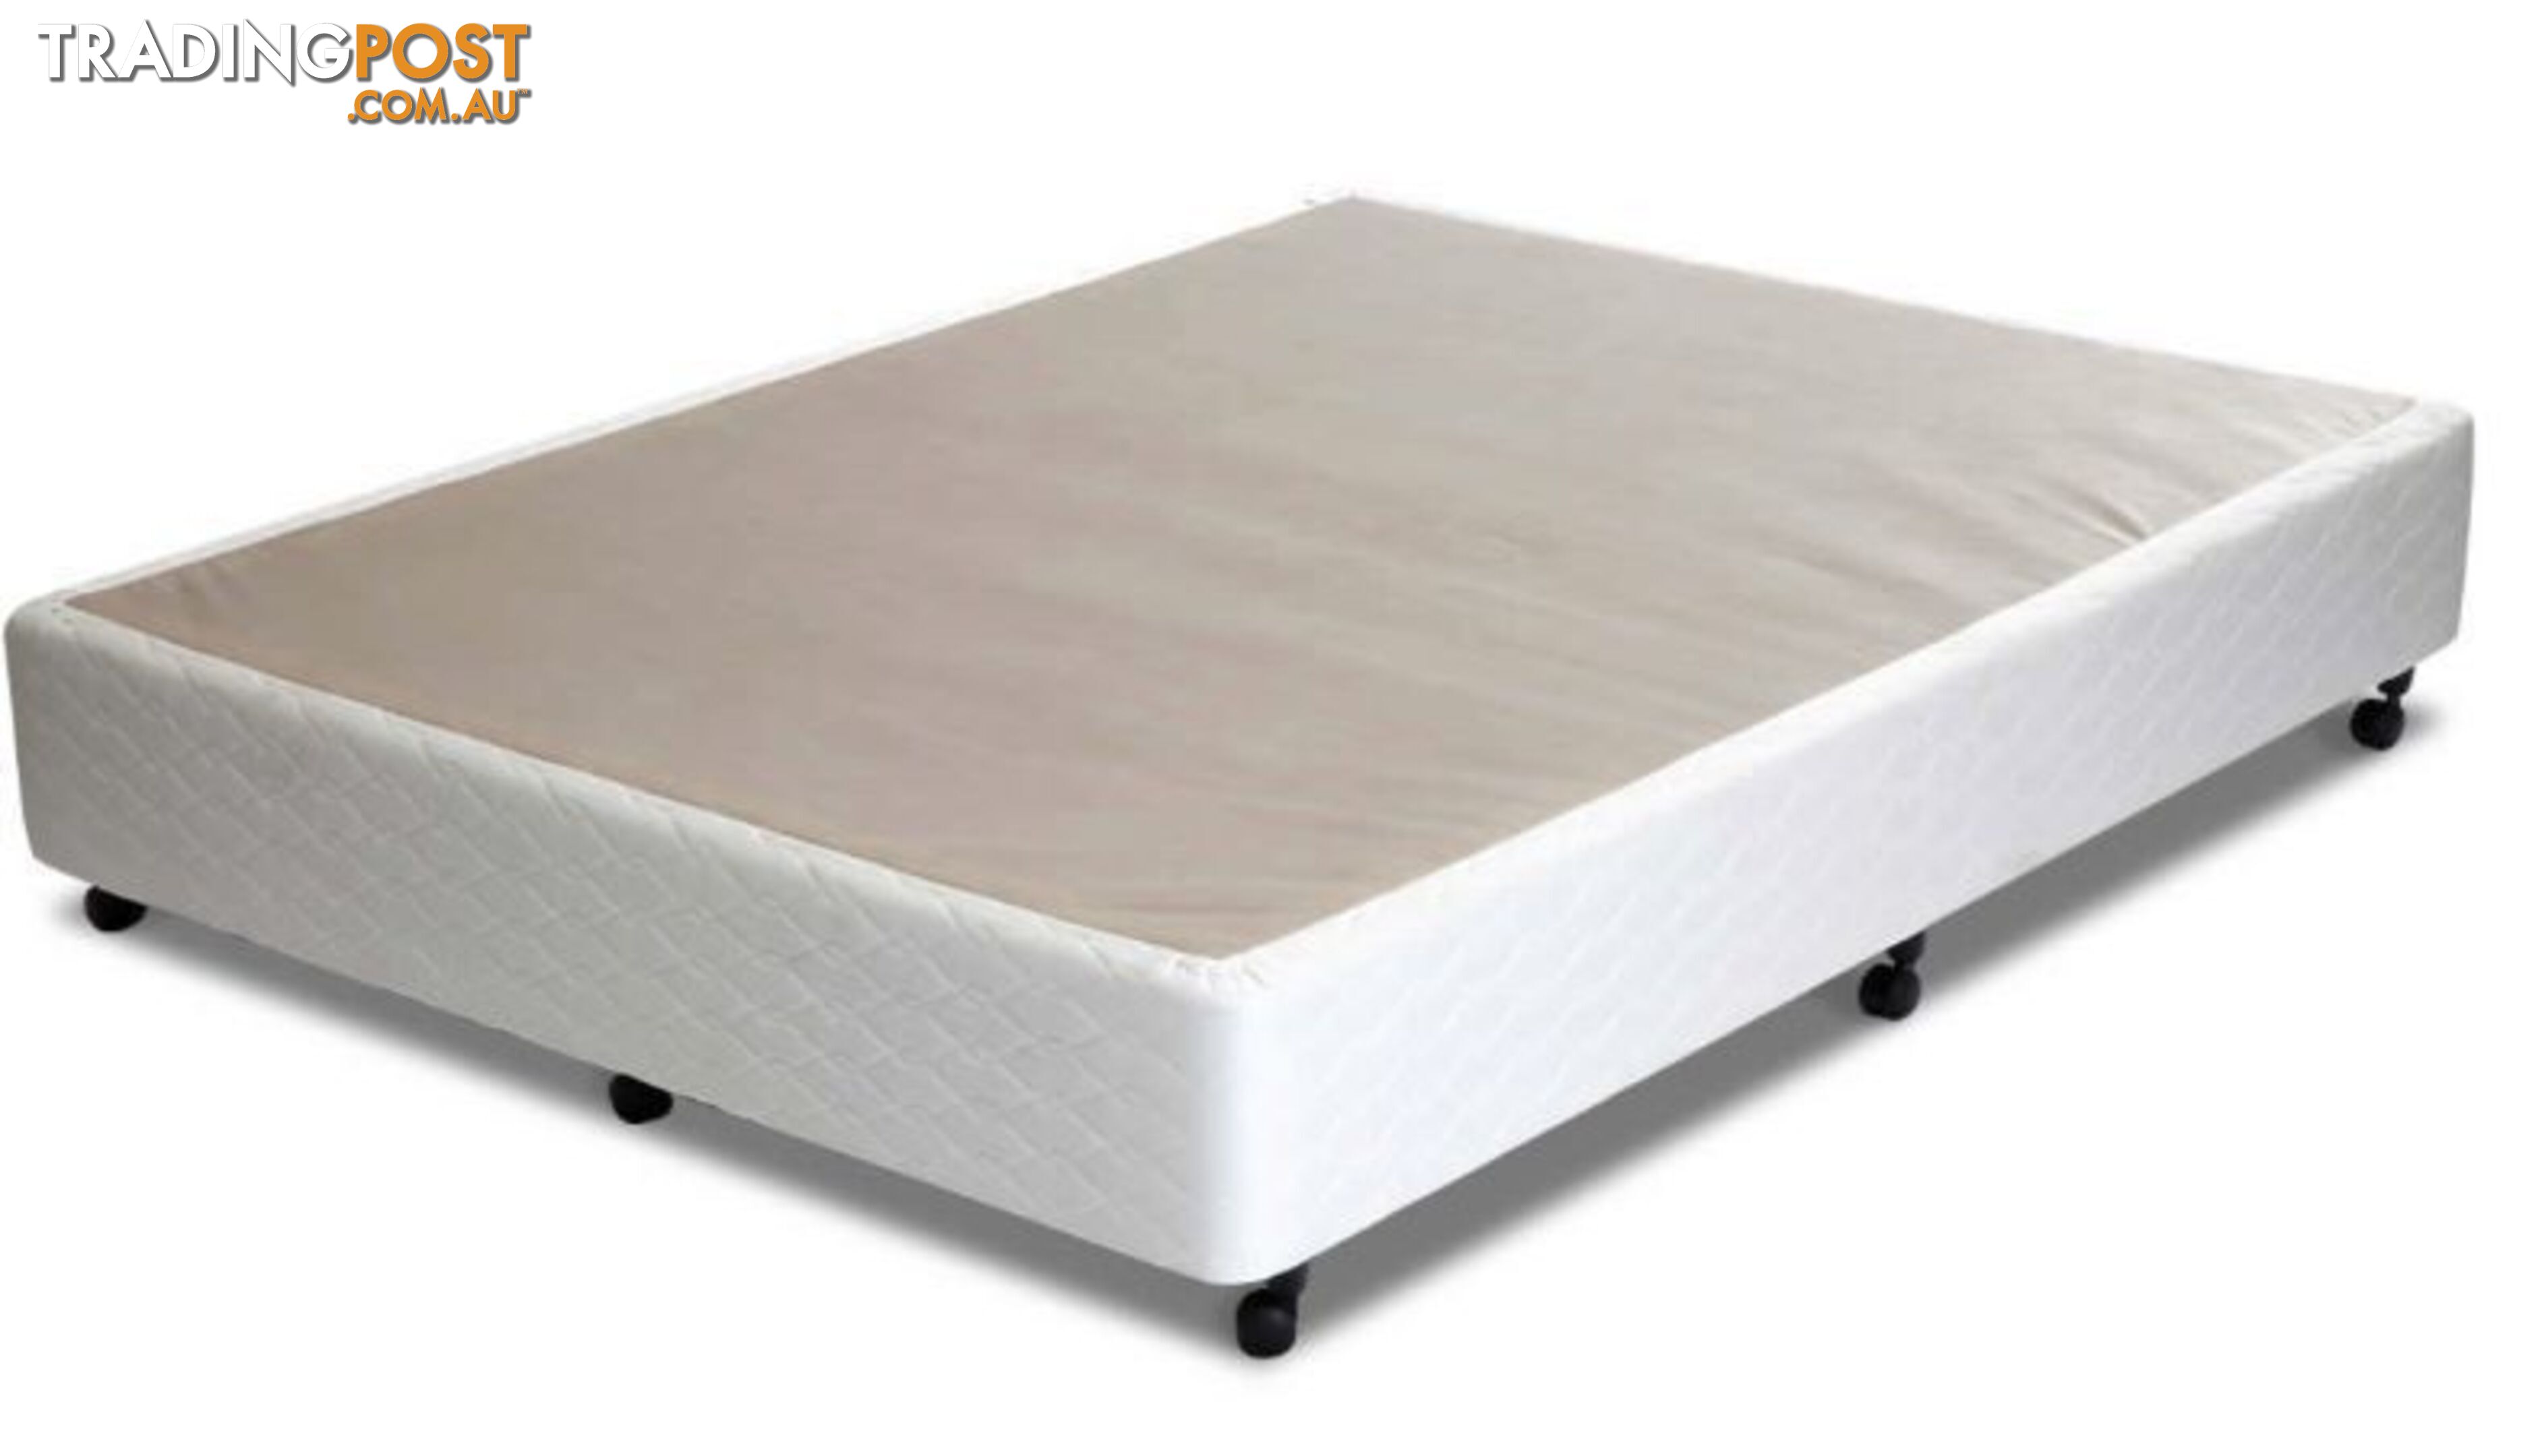 CLEARANCE SALE, 50% OFF ON BEDS, SALE!! BRAND NEW BEDS ON SALE!